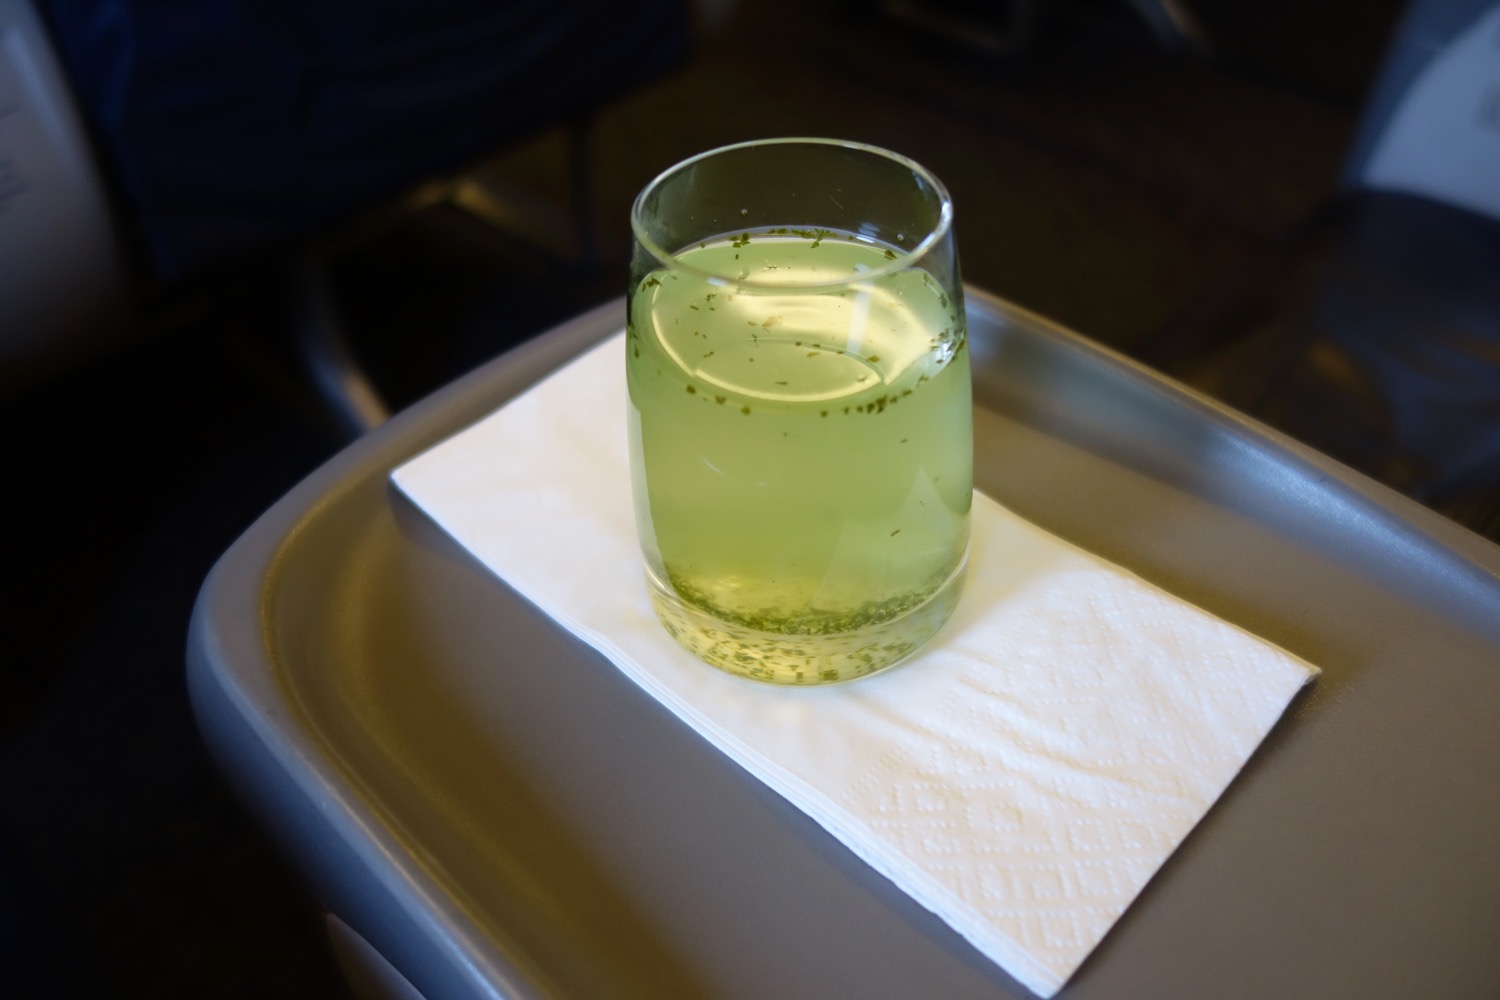 a glass of green liquid on a napkin on a tray